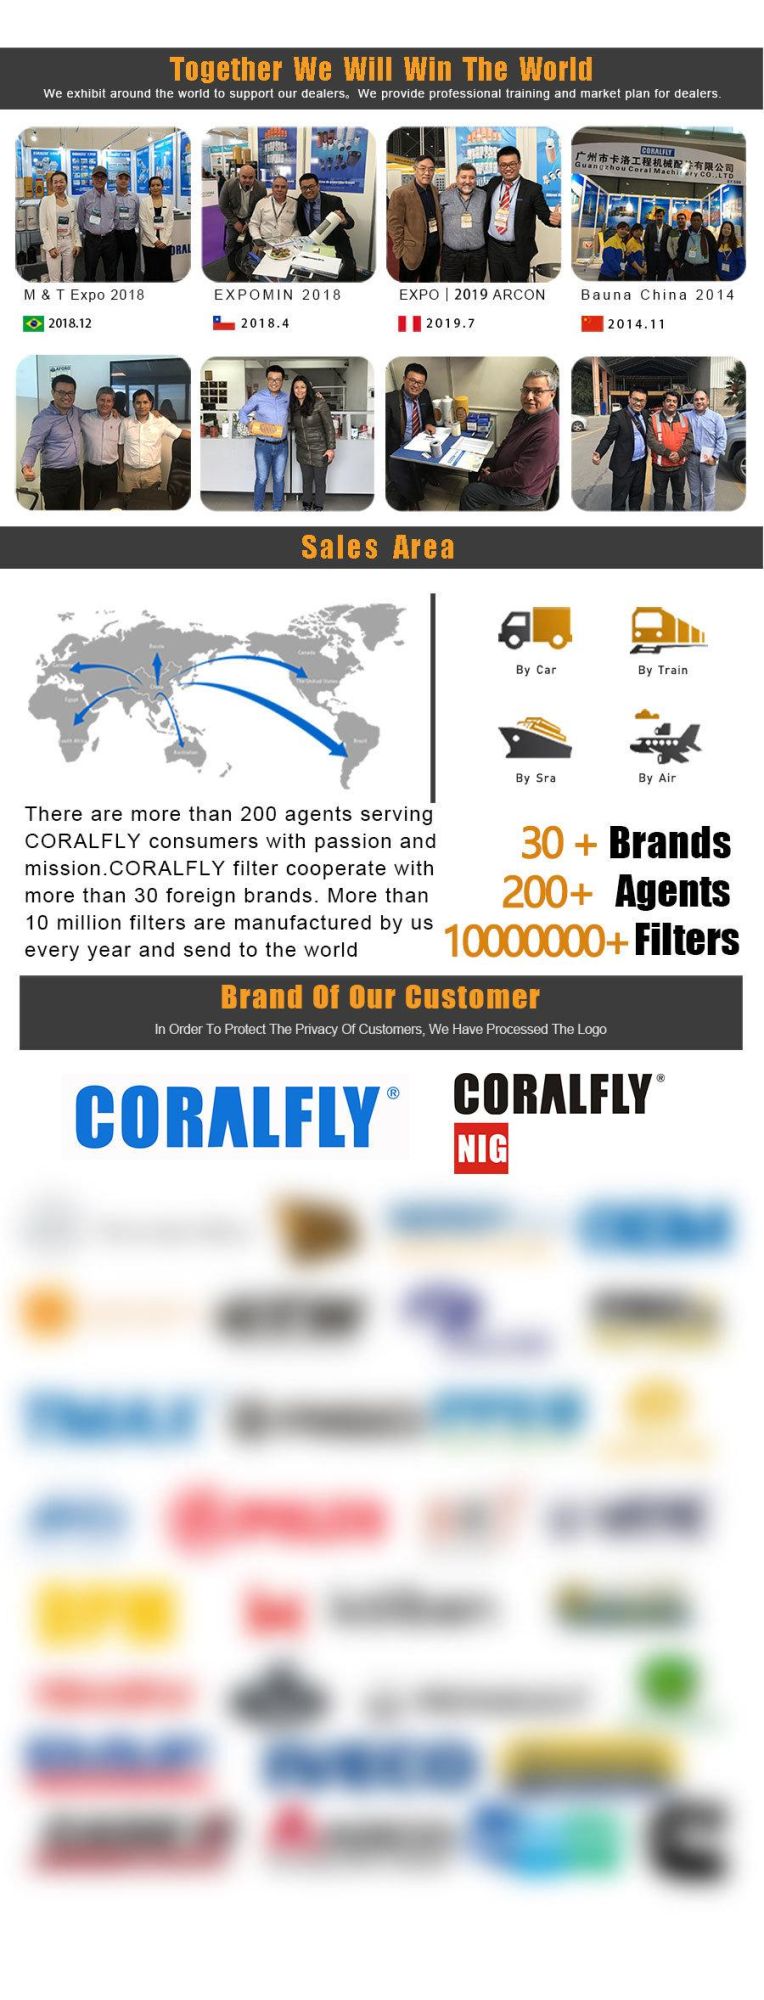 Coralfly High Quality Car Oil Filters Replaces Wix Wl7117 Wl7119 Wl7131 Wl7134 Wl7154 Wl7171 Wl7172 Wl7175 Wl7177 Wl7200